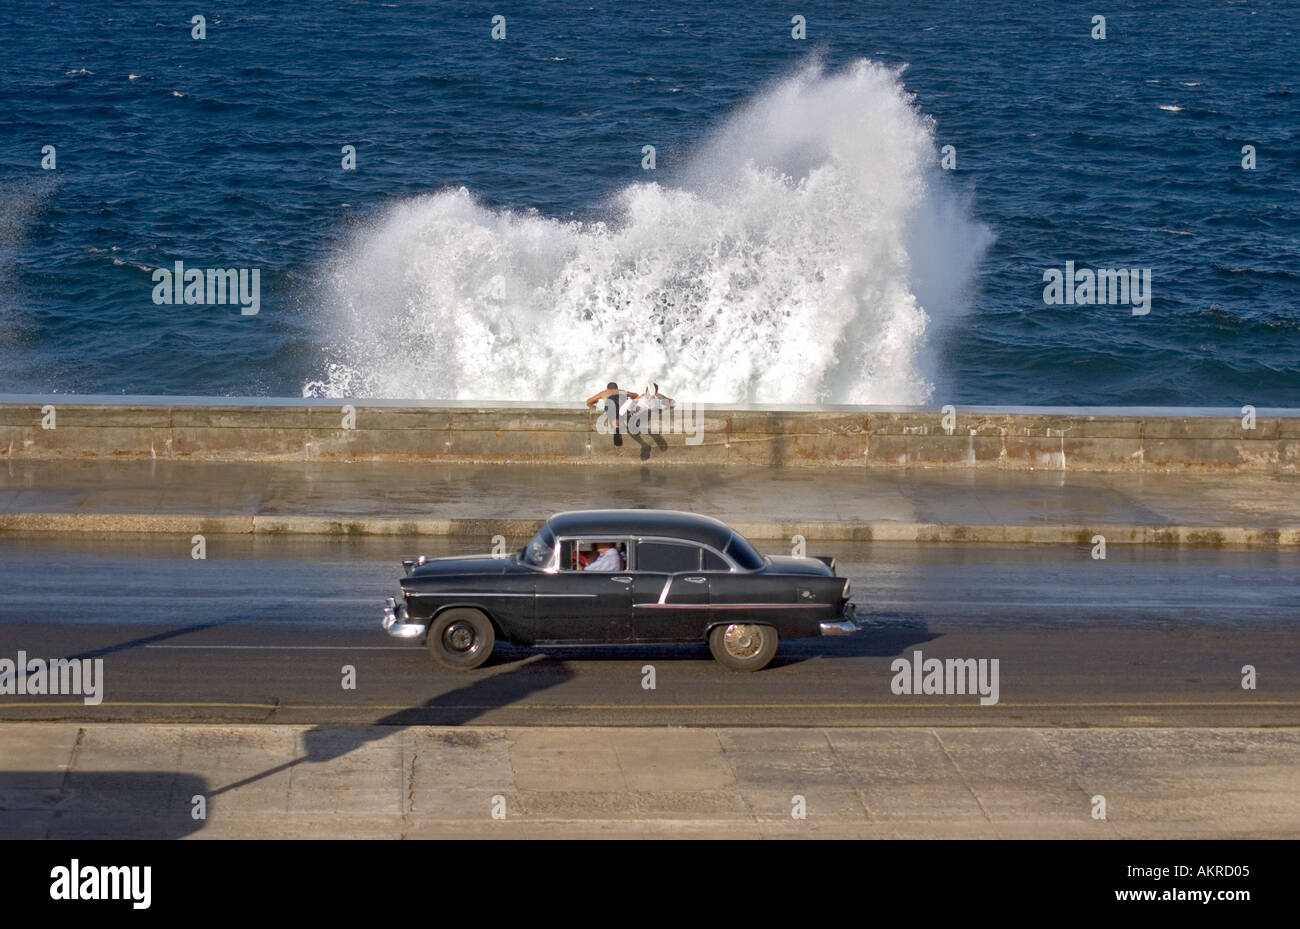 two young boys watching waves breaking over sea wall with old american car in foreground Stock Photo